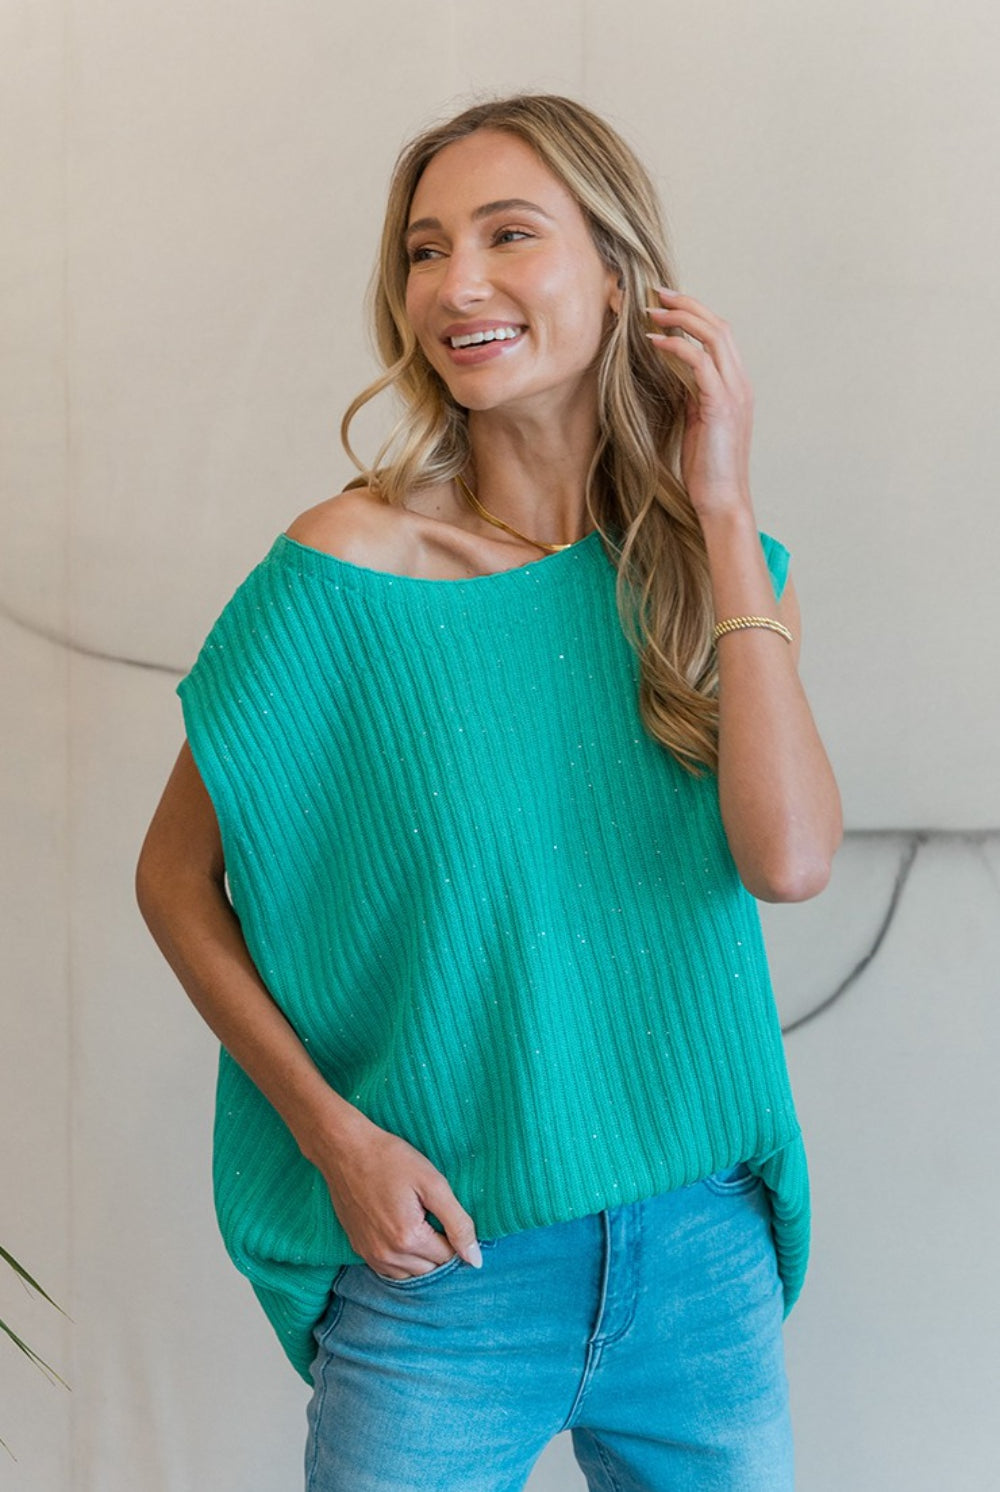 A woman smiling gently while modeling a teal ribbed sweater vest with an off-the-shoulder neckline, giving it a casual yet chic look. She is paired with light blue distressed jeans, sitting on a wooden stool against a neutral background, adding a relaxed and approachable vibe to the image. Her blonde hair falls in loose waves, complementing the laid-back yet fashionable outfit.